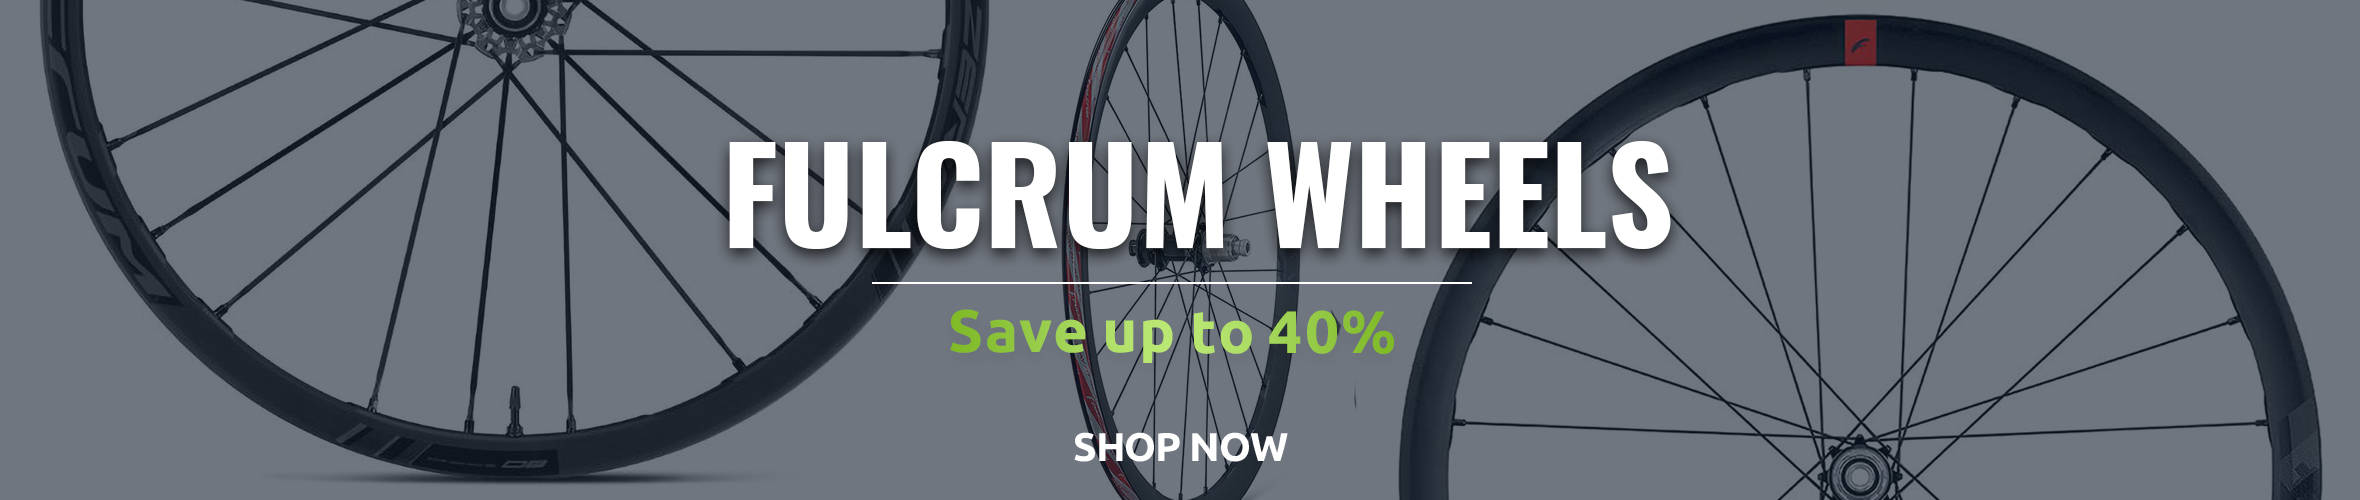 Fulcrum Wheels - Save up to 40%